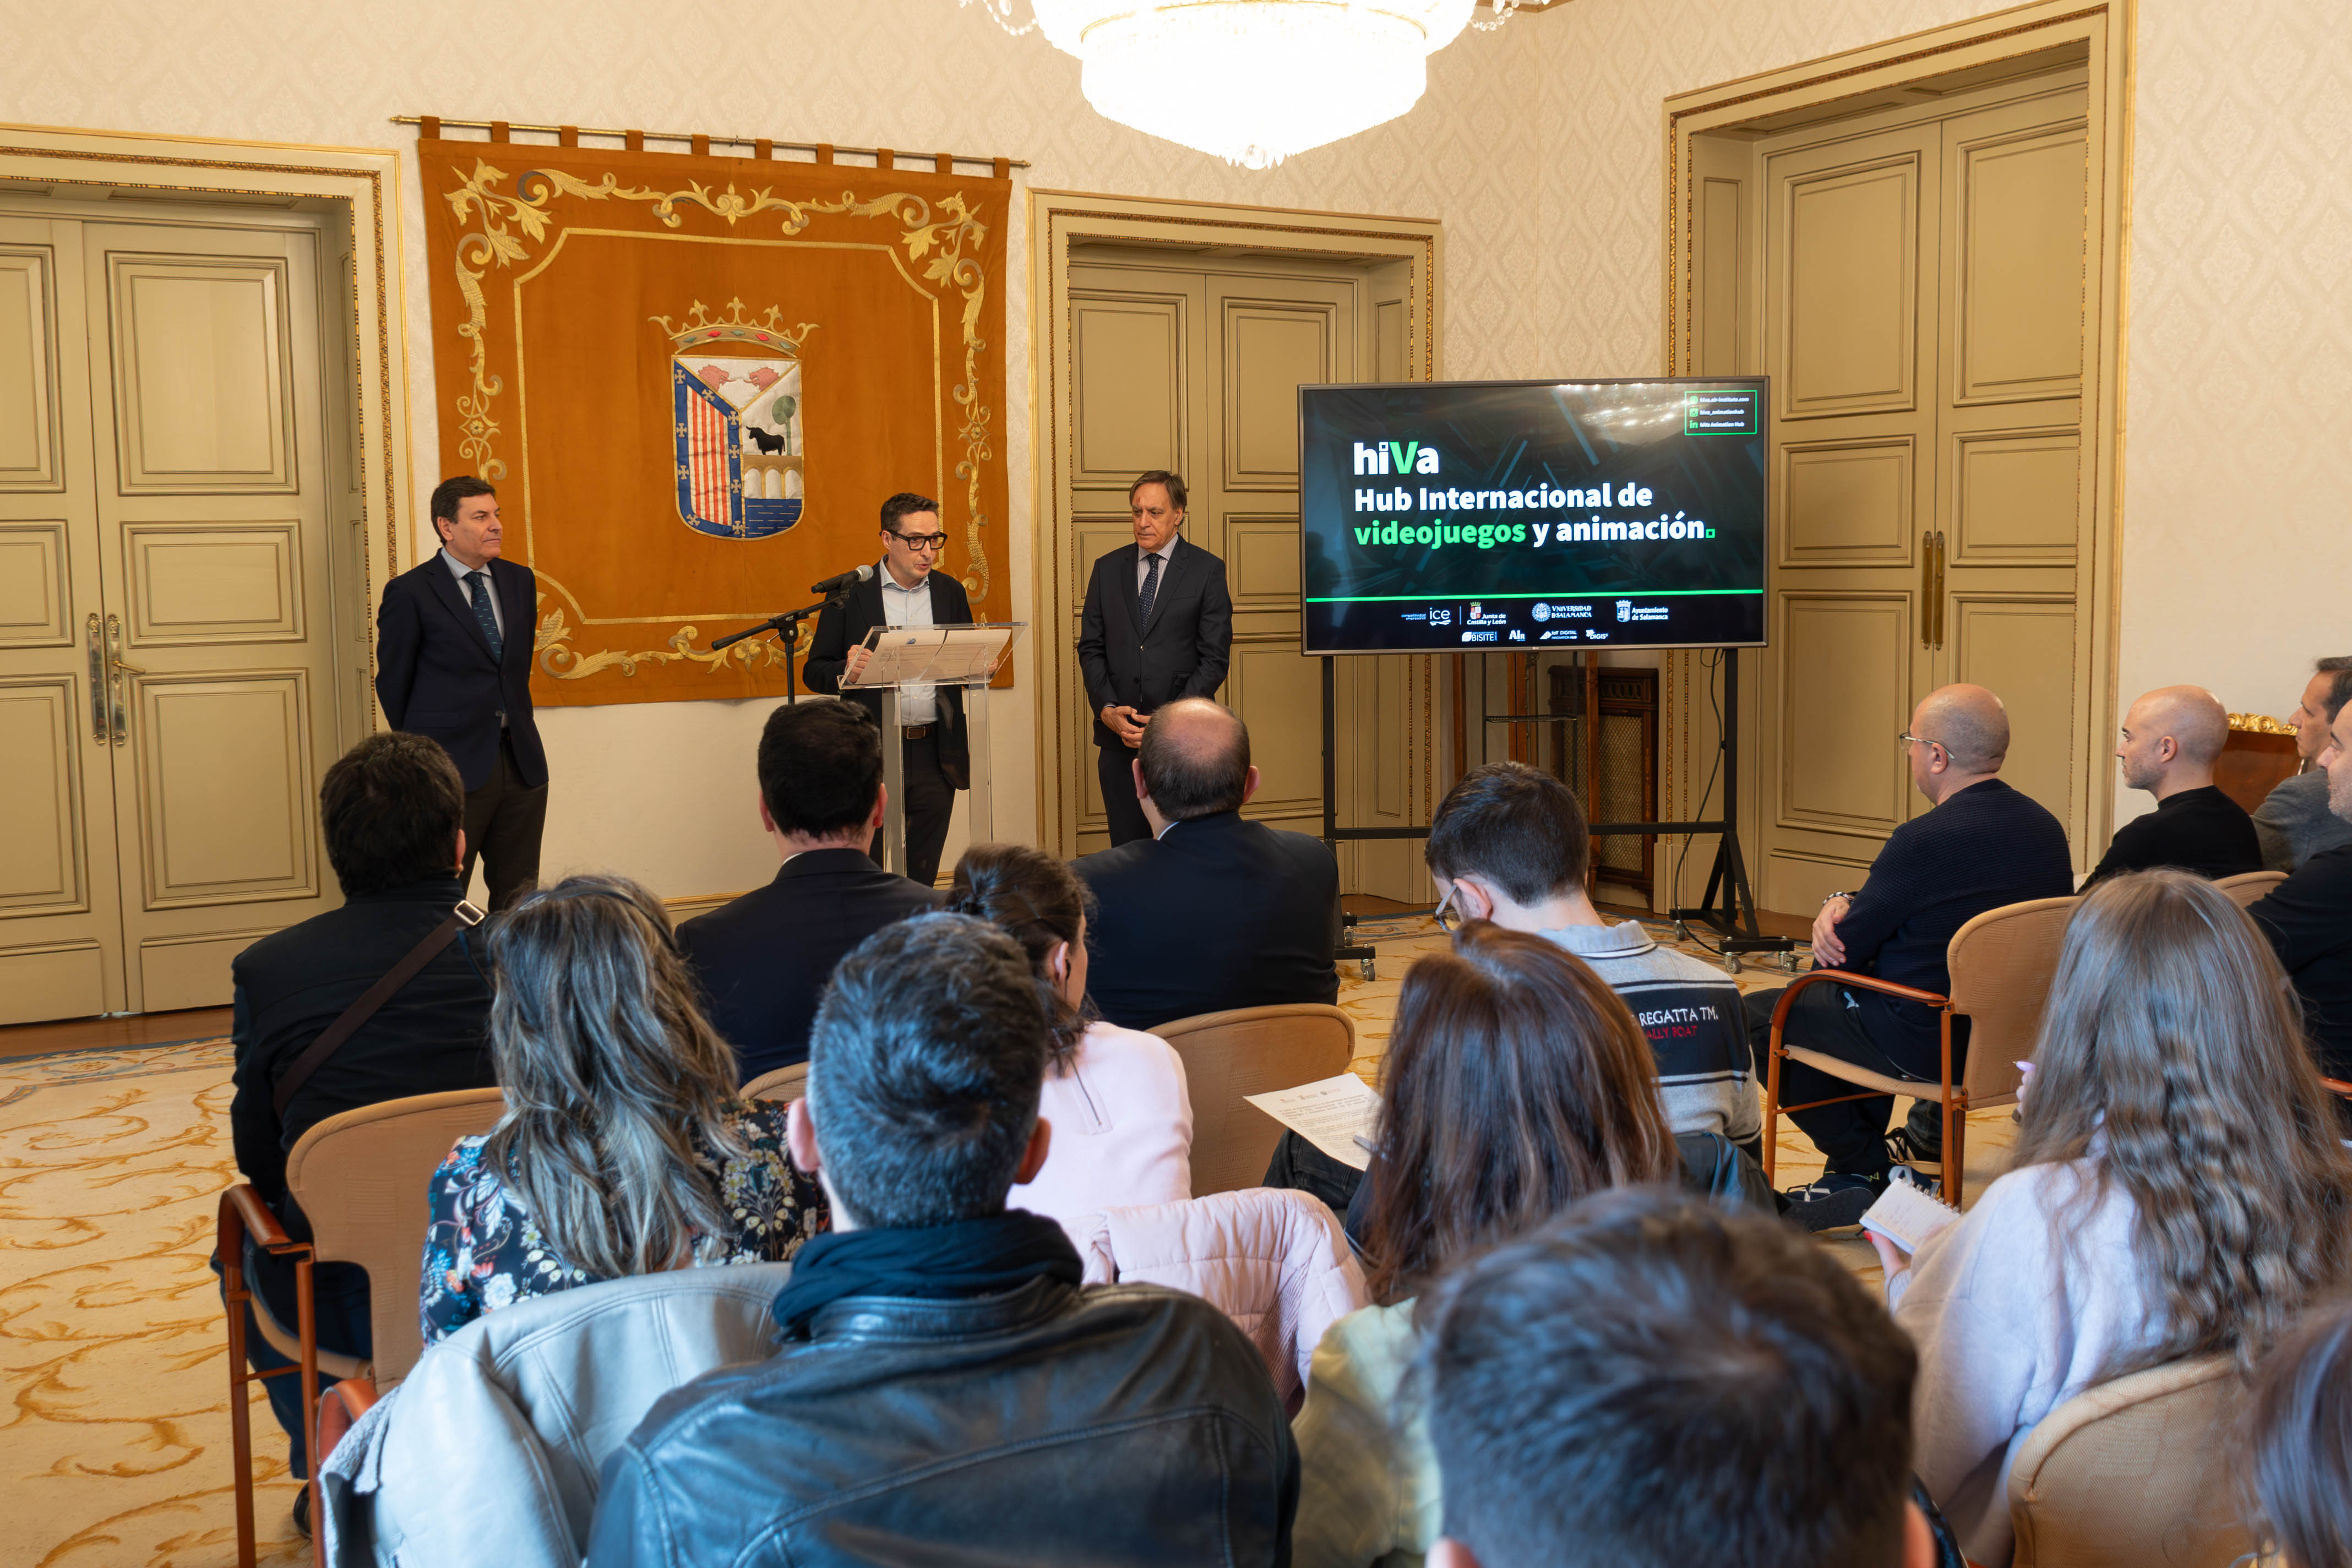 The Junta, the City Council and the University of Salamanca Launch the International Innovation Pole for Videogames and Animation with AIR Institute